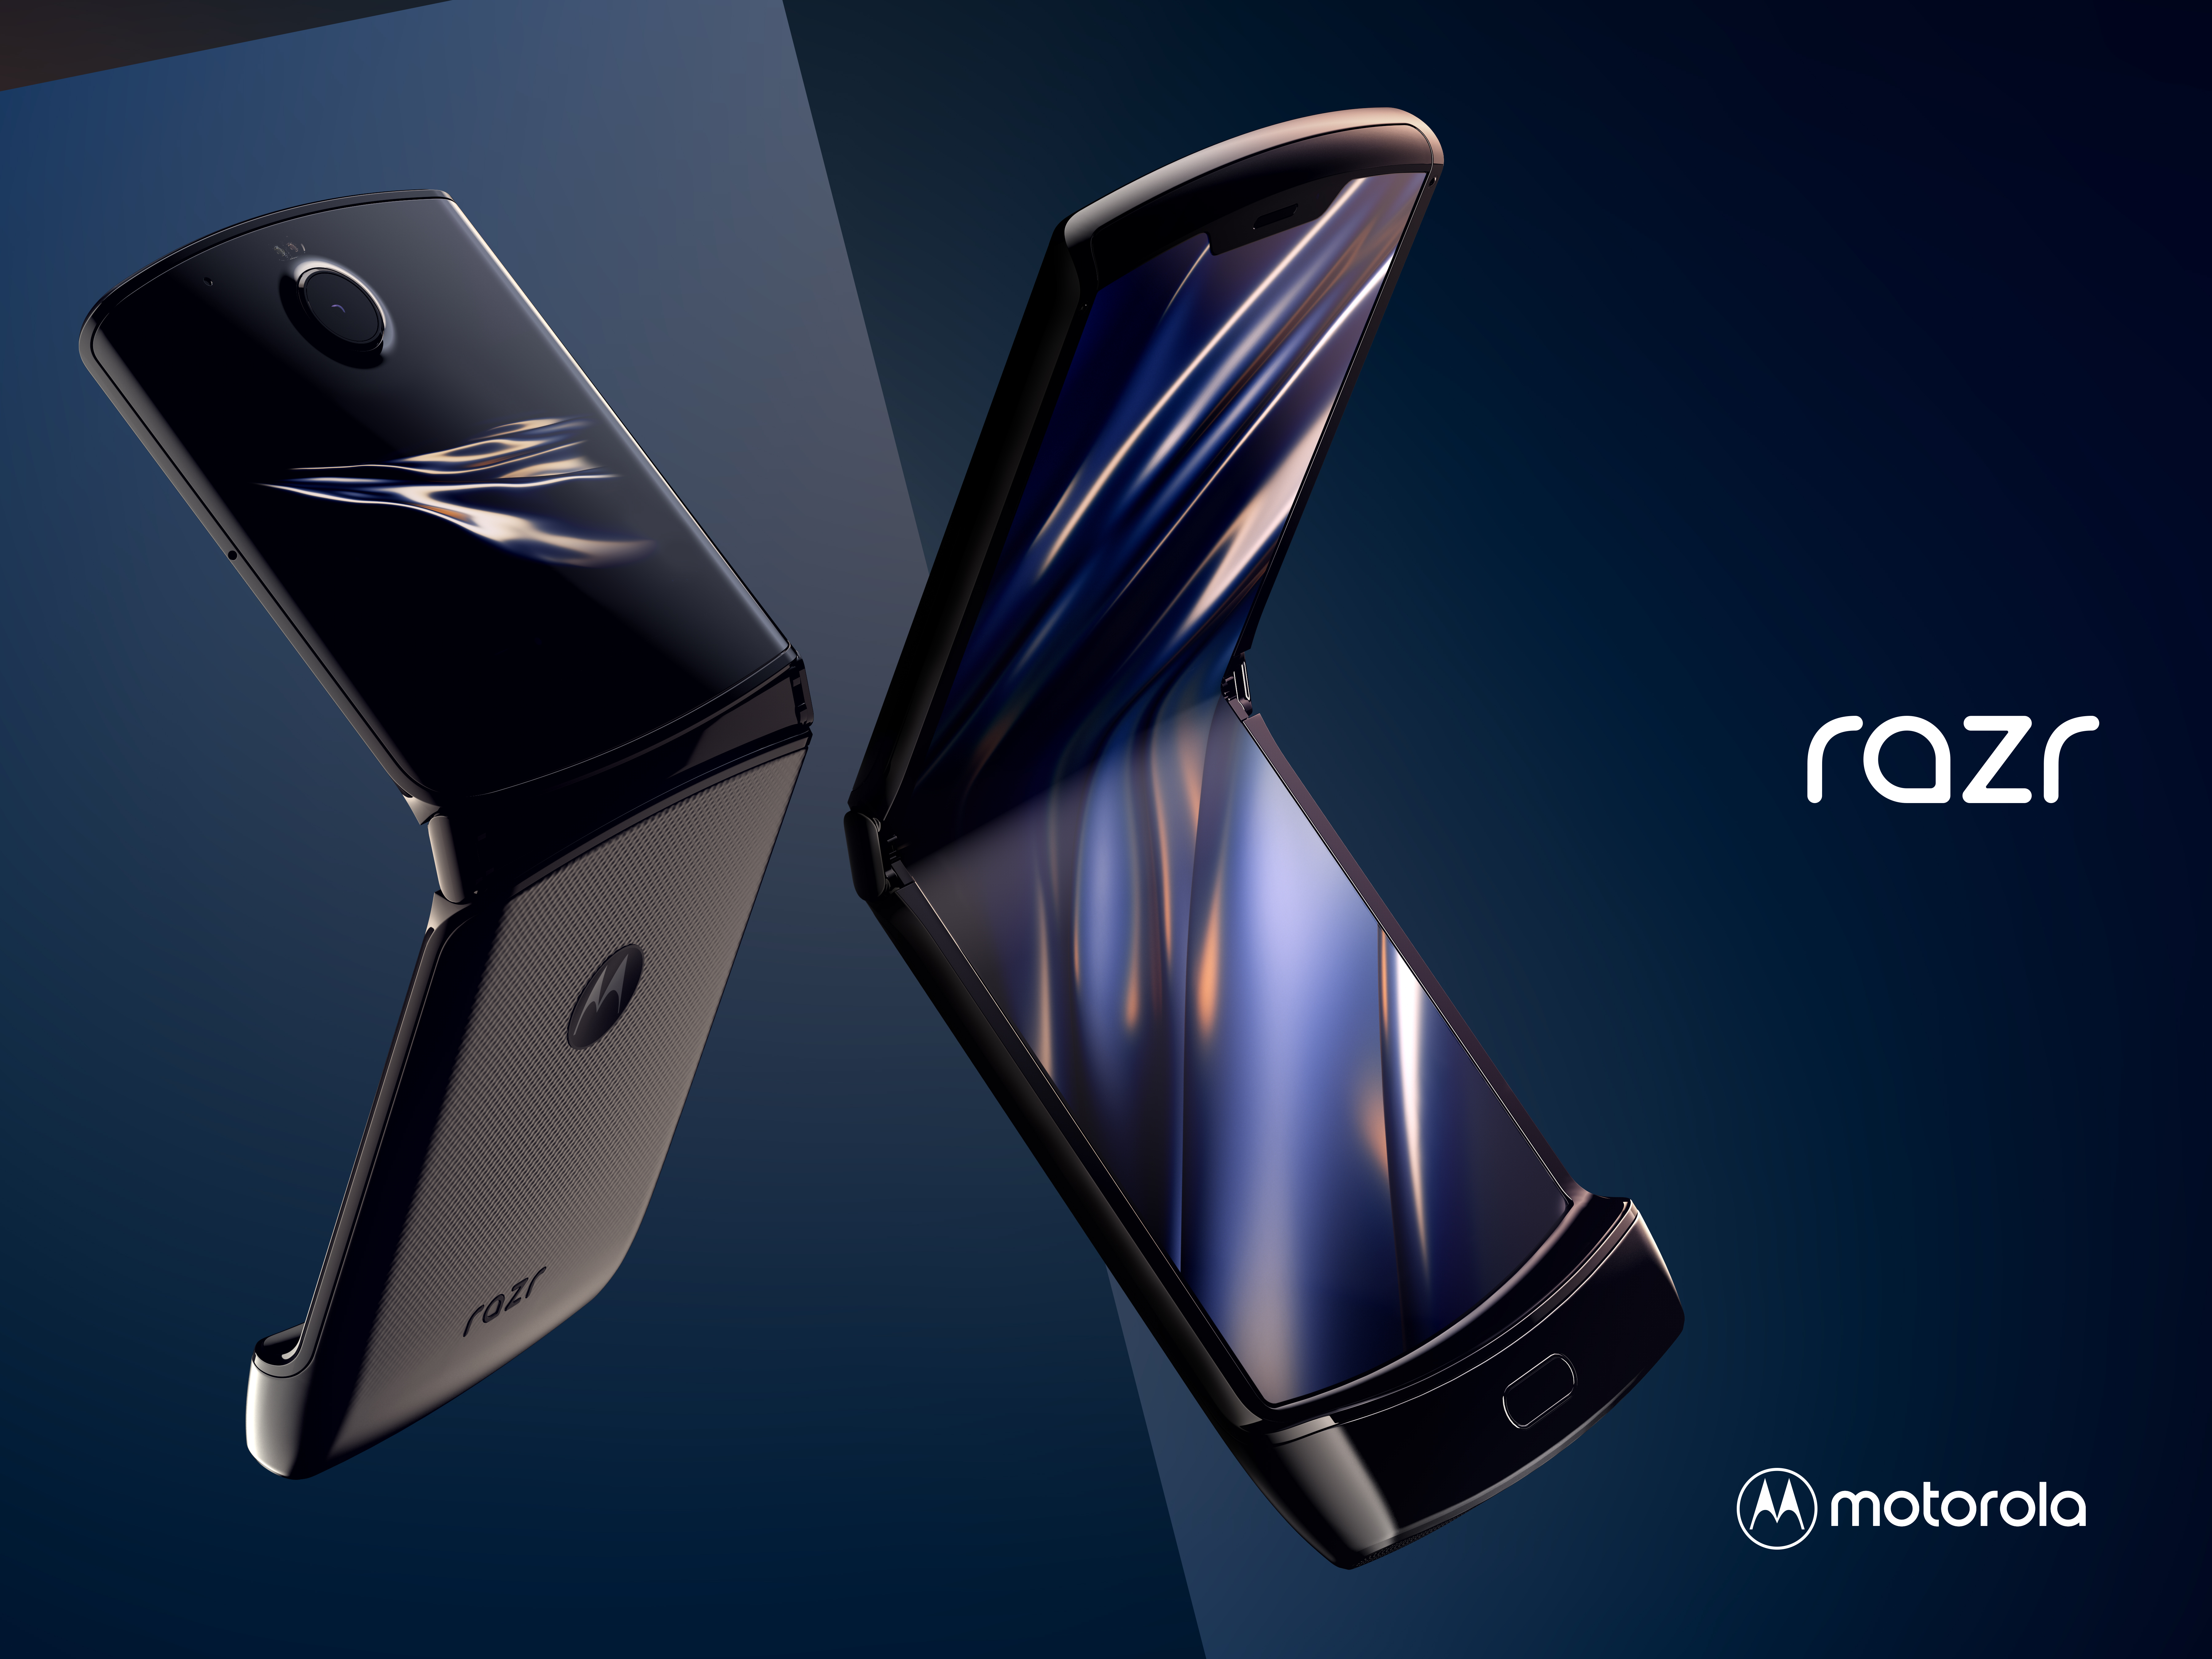 The Motorola Razr is rumoured to be making a comeback for 2019 as a  foldable smartphone